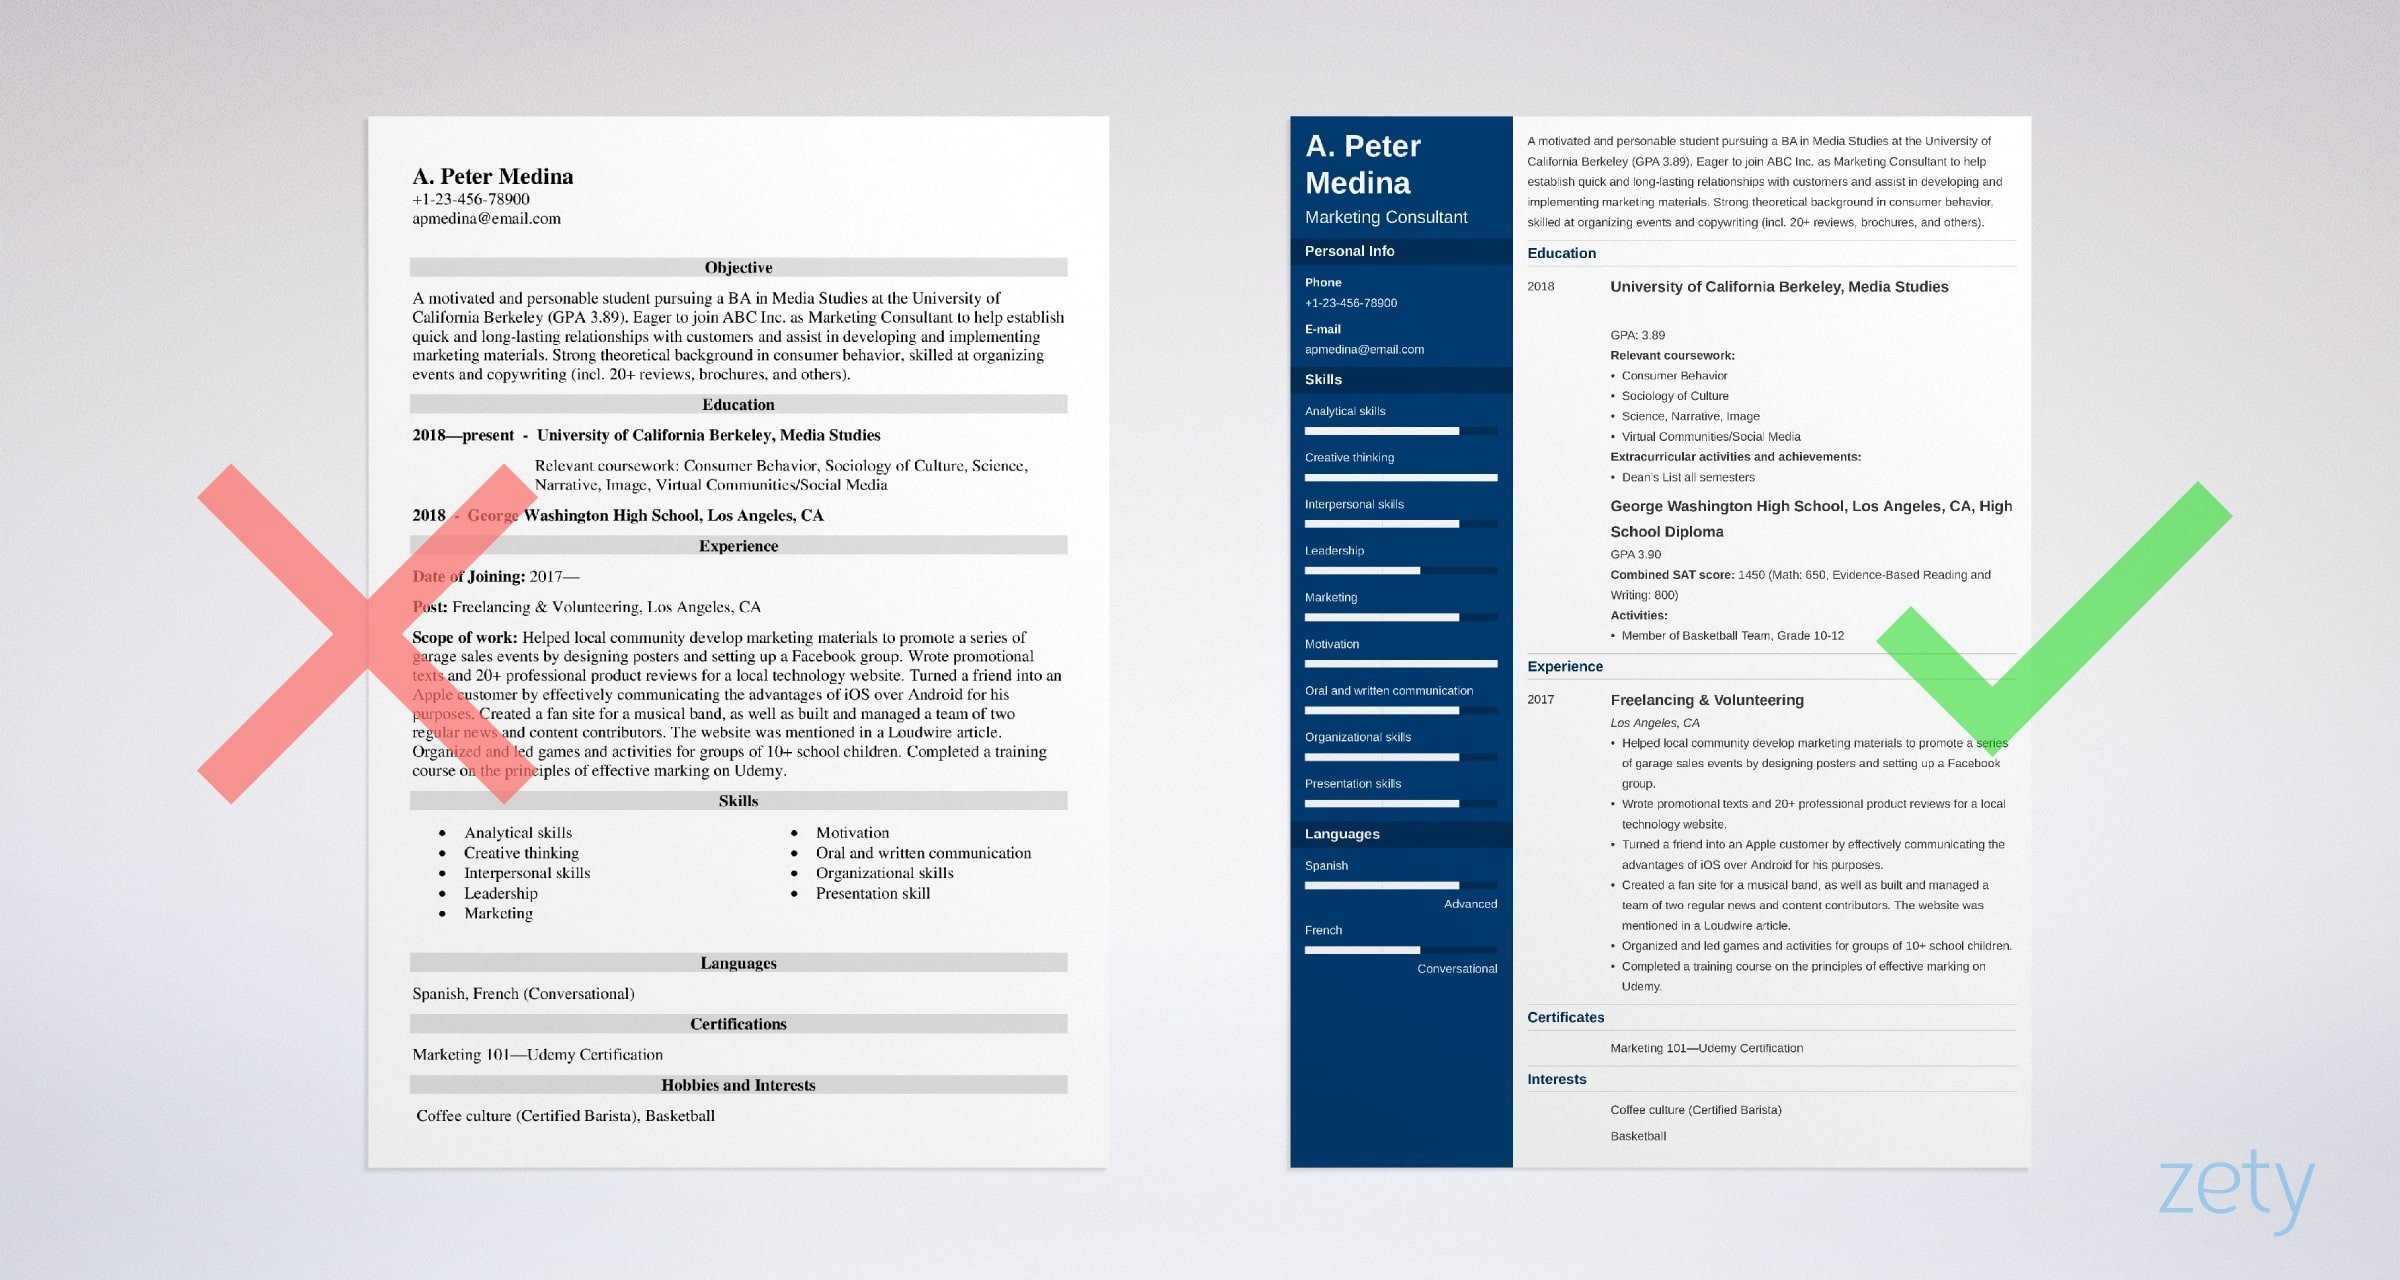 Resume Samples with Little Work History How to Make A Resume with No Experience: First Job Examples